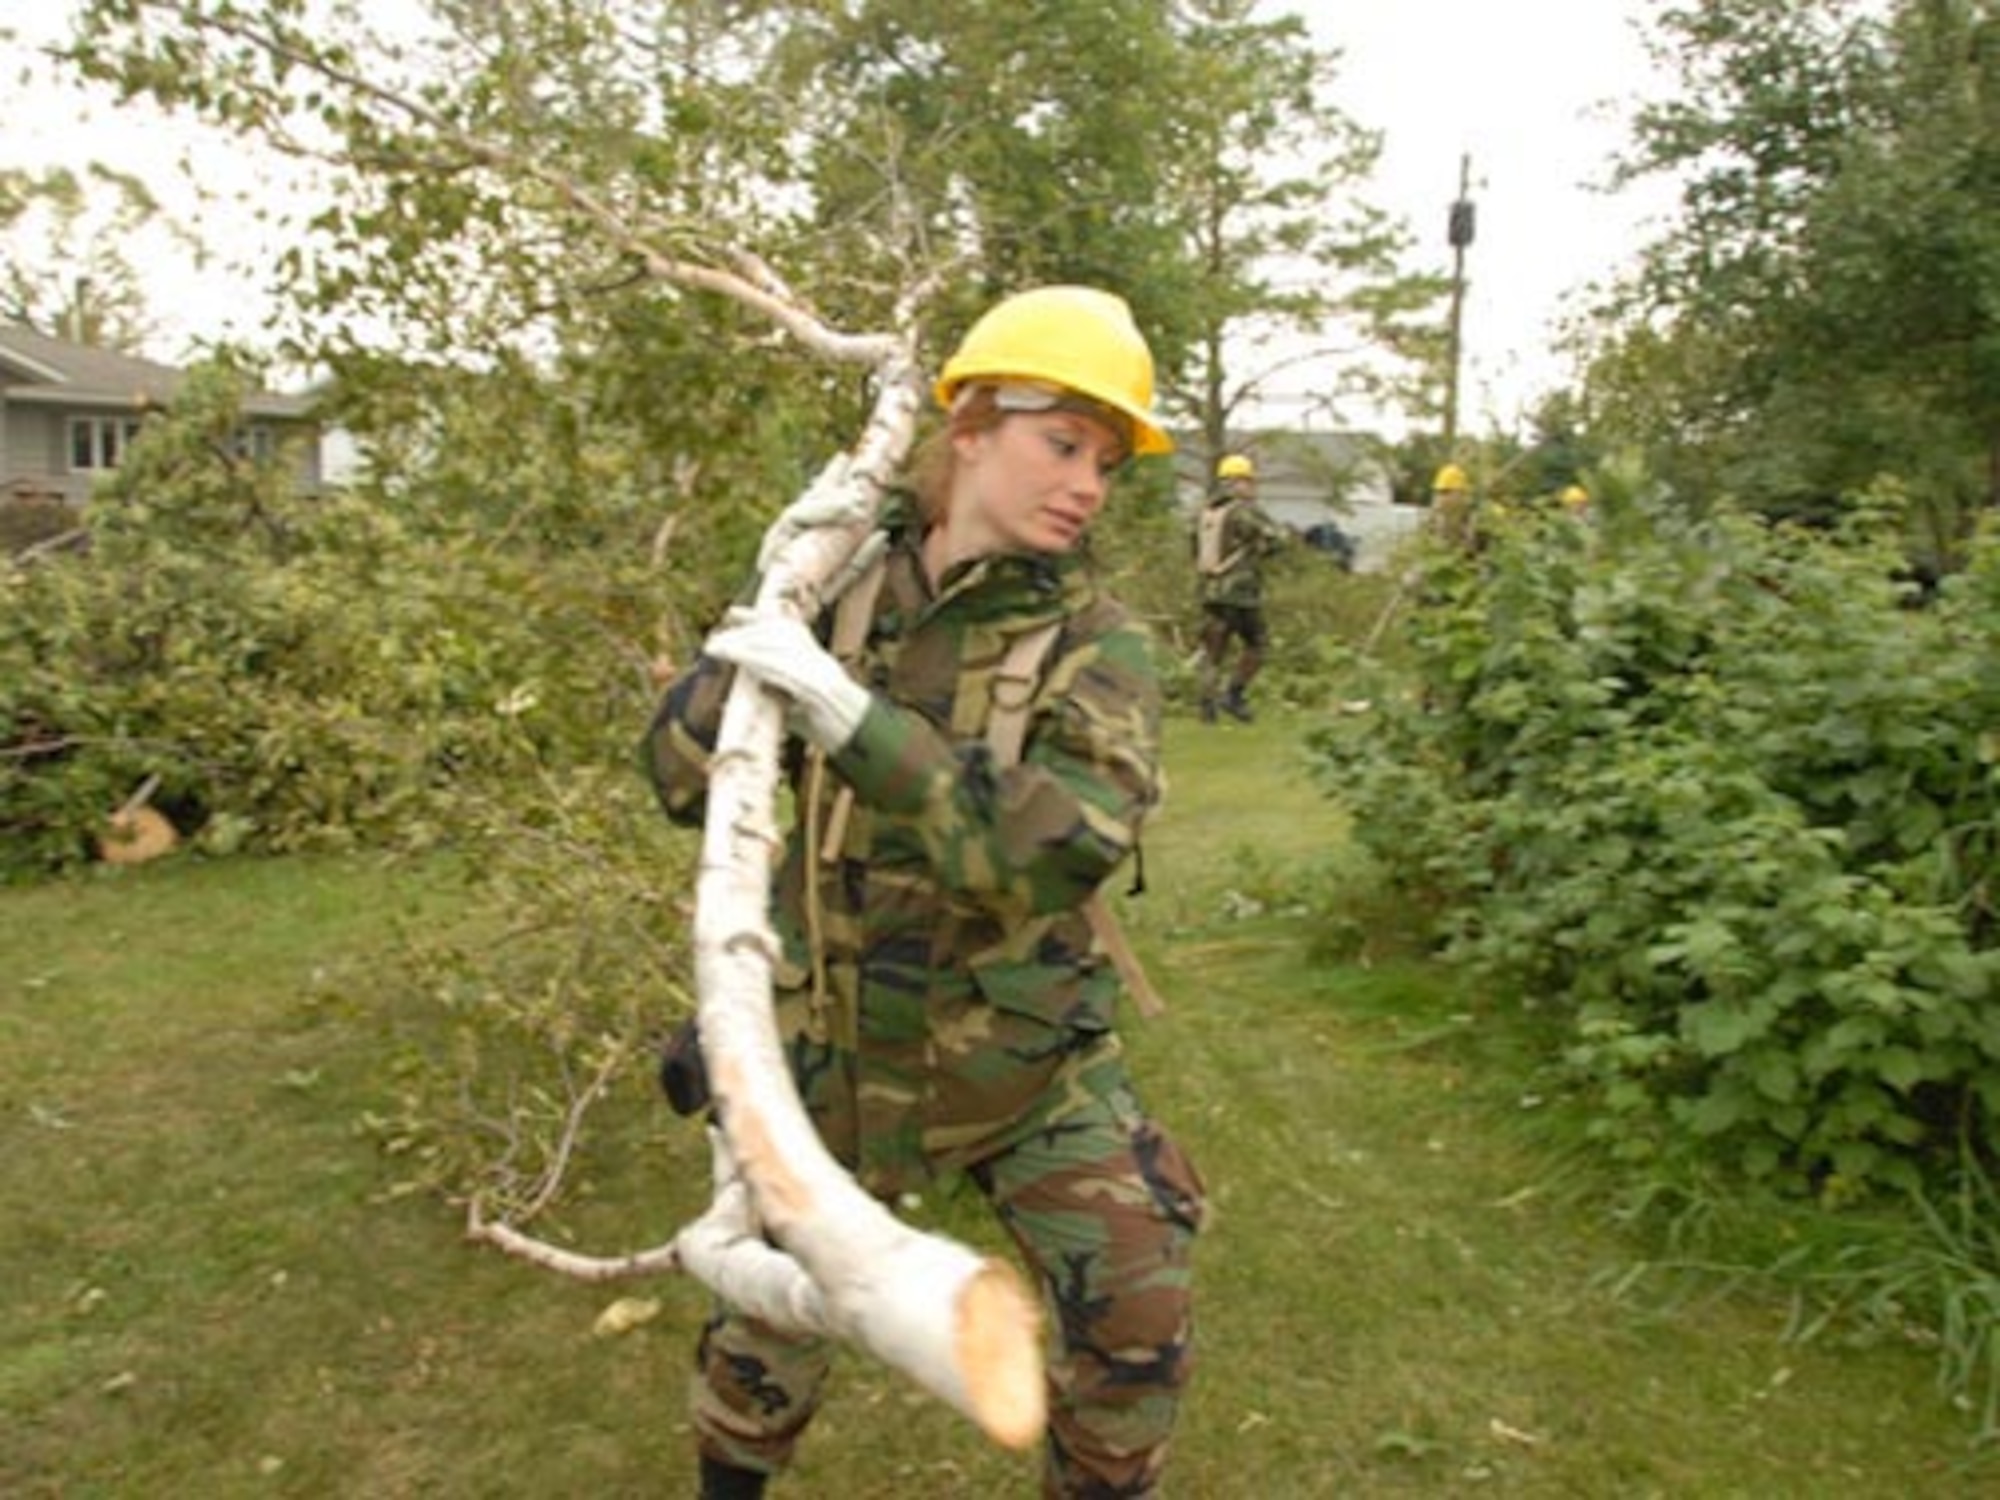 U.S. Air Force Staff Sgt. Sarah A. Ford, of the 119th Wing, removes fallen tree branches and debris from yards in order to clear a path for power line workers in Northwood, N.D., Aug. 28, 2007. A Fujita scale F-4 tornado that hit the city on Aug. 26, 2007 caused the damage. (U.S. Air Force photo by Senior Master Sgt. David H. Lipp) (Released)